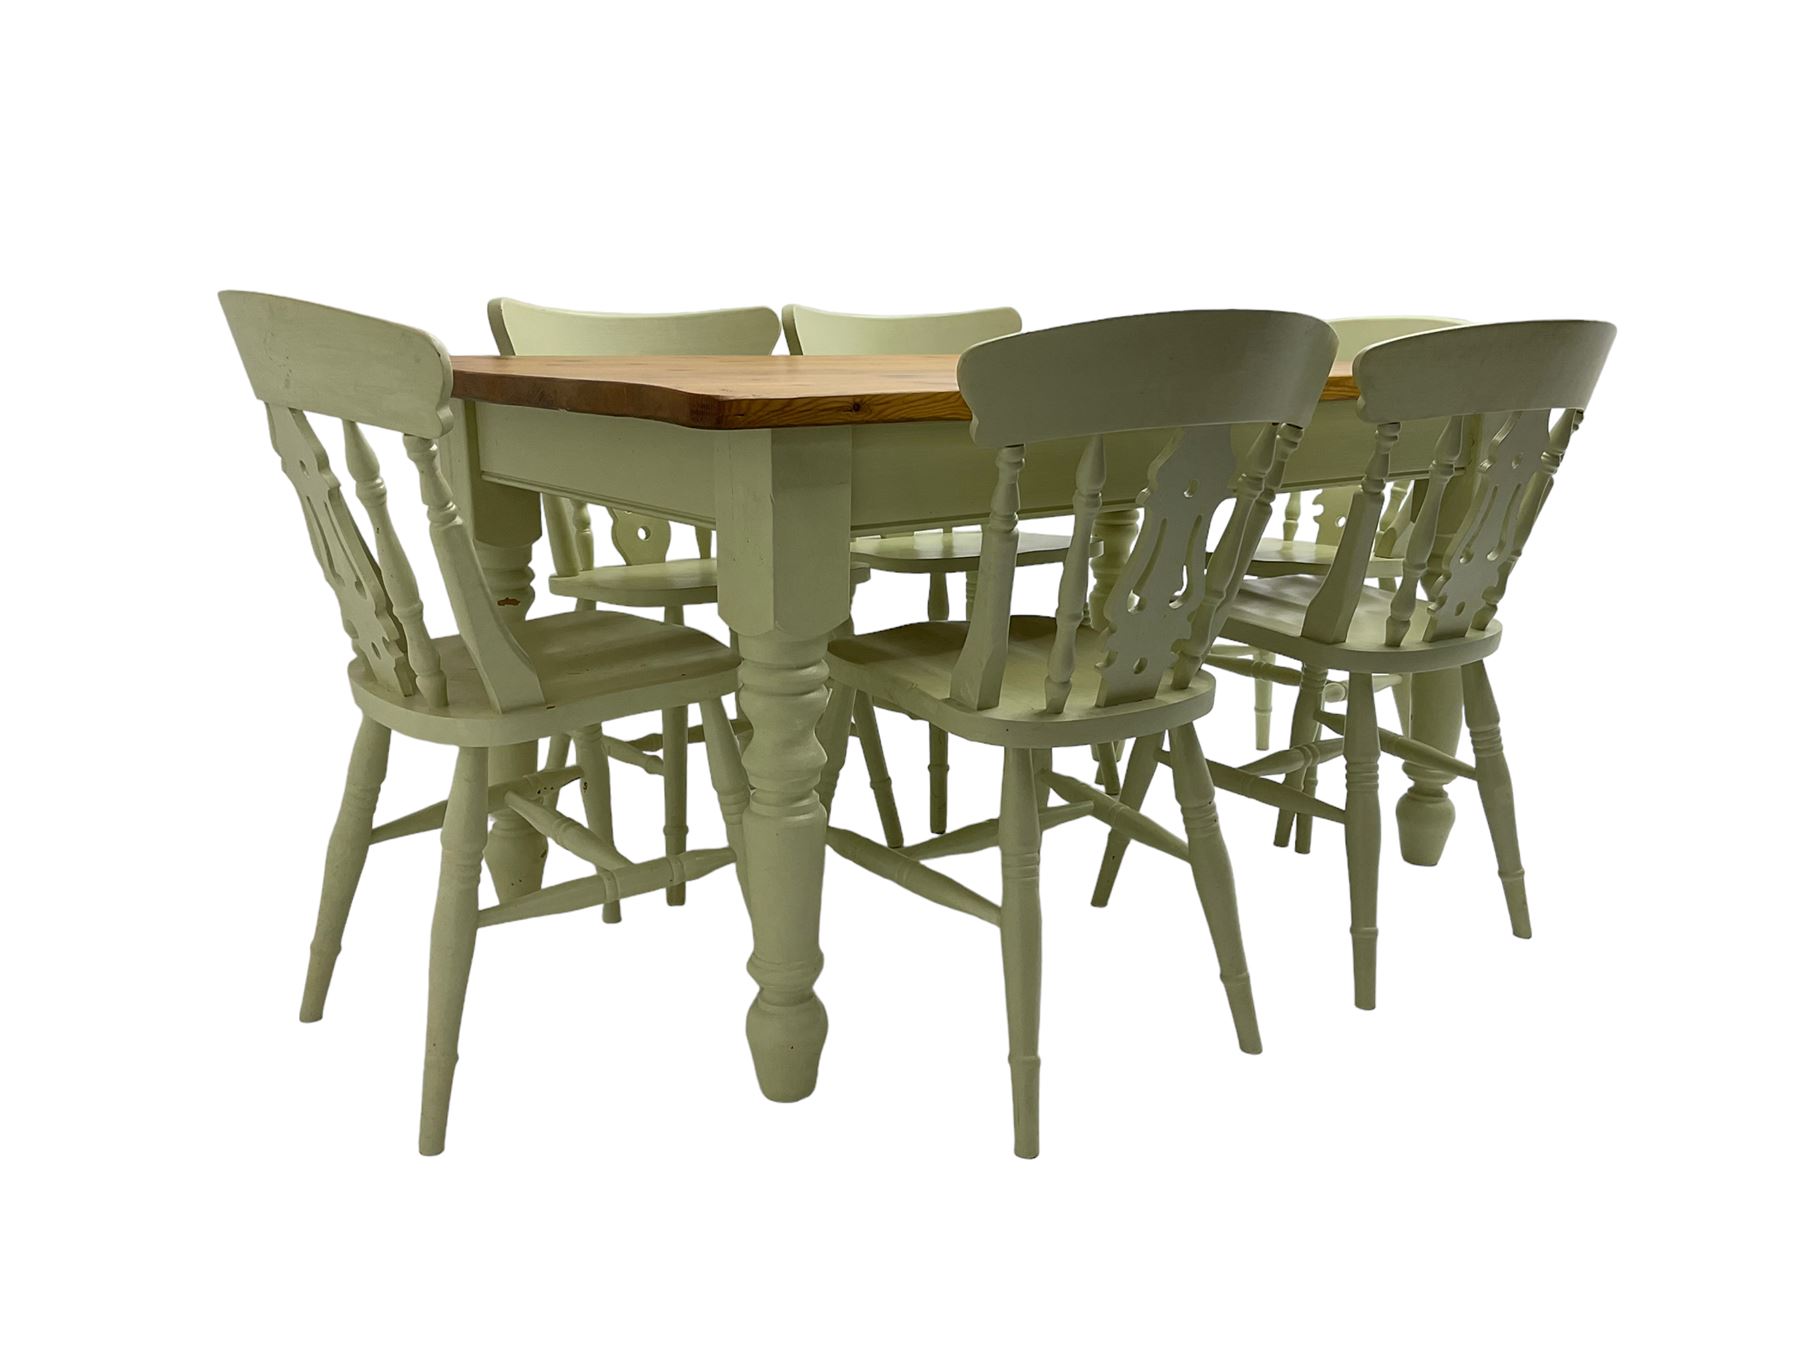 Traditional farmhouse pine dining table - Image 8 of 9